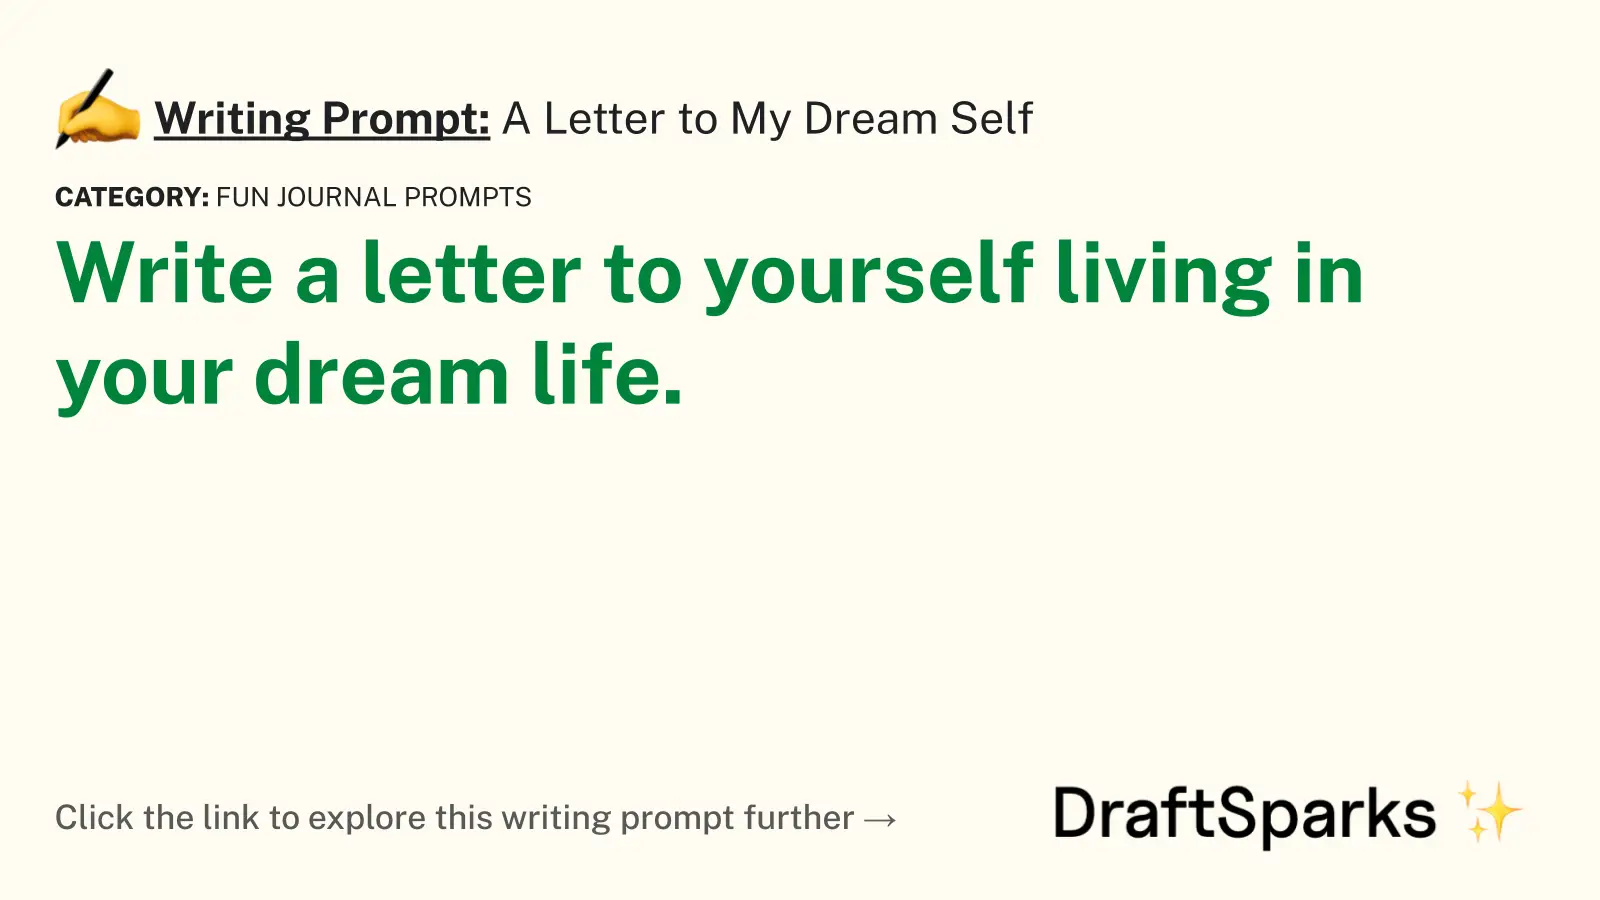 A Letter to My Dream Self